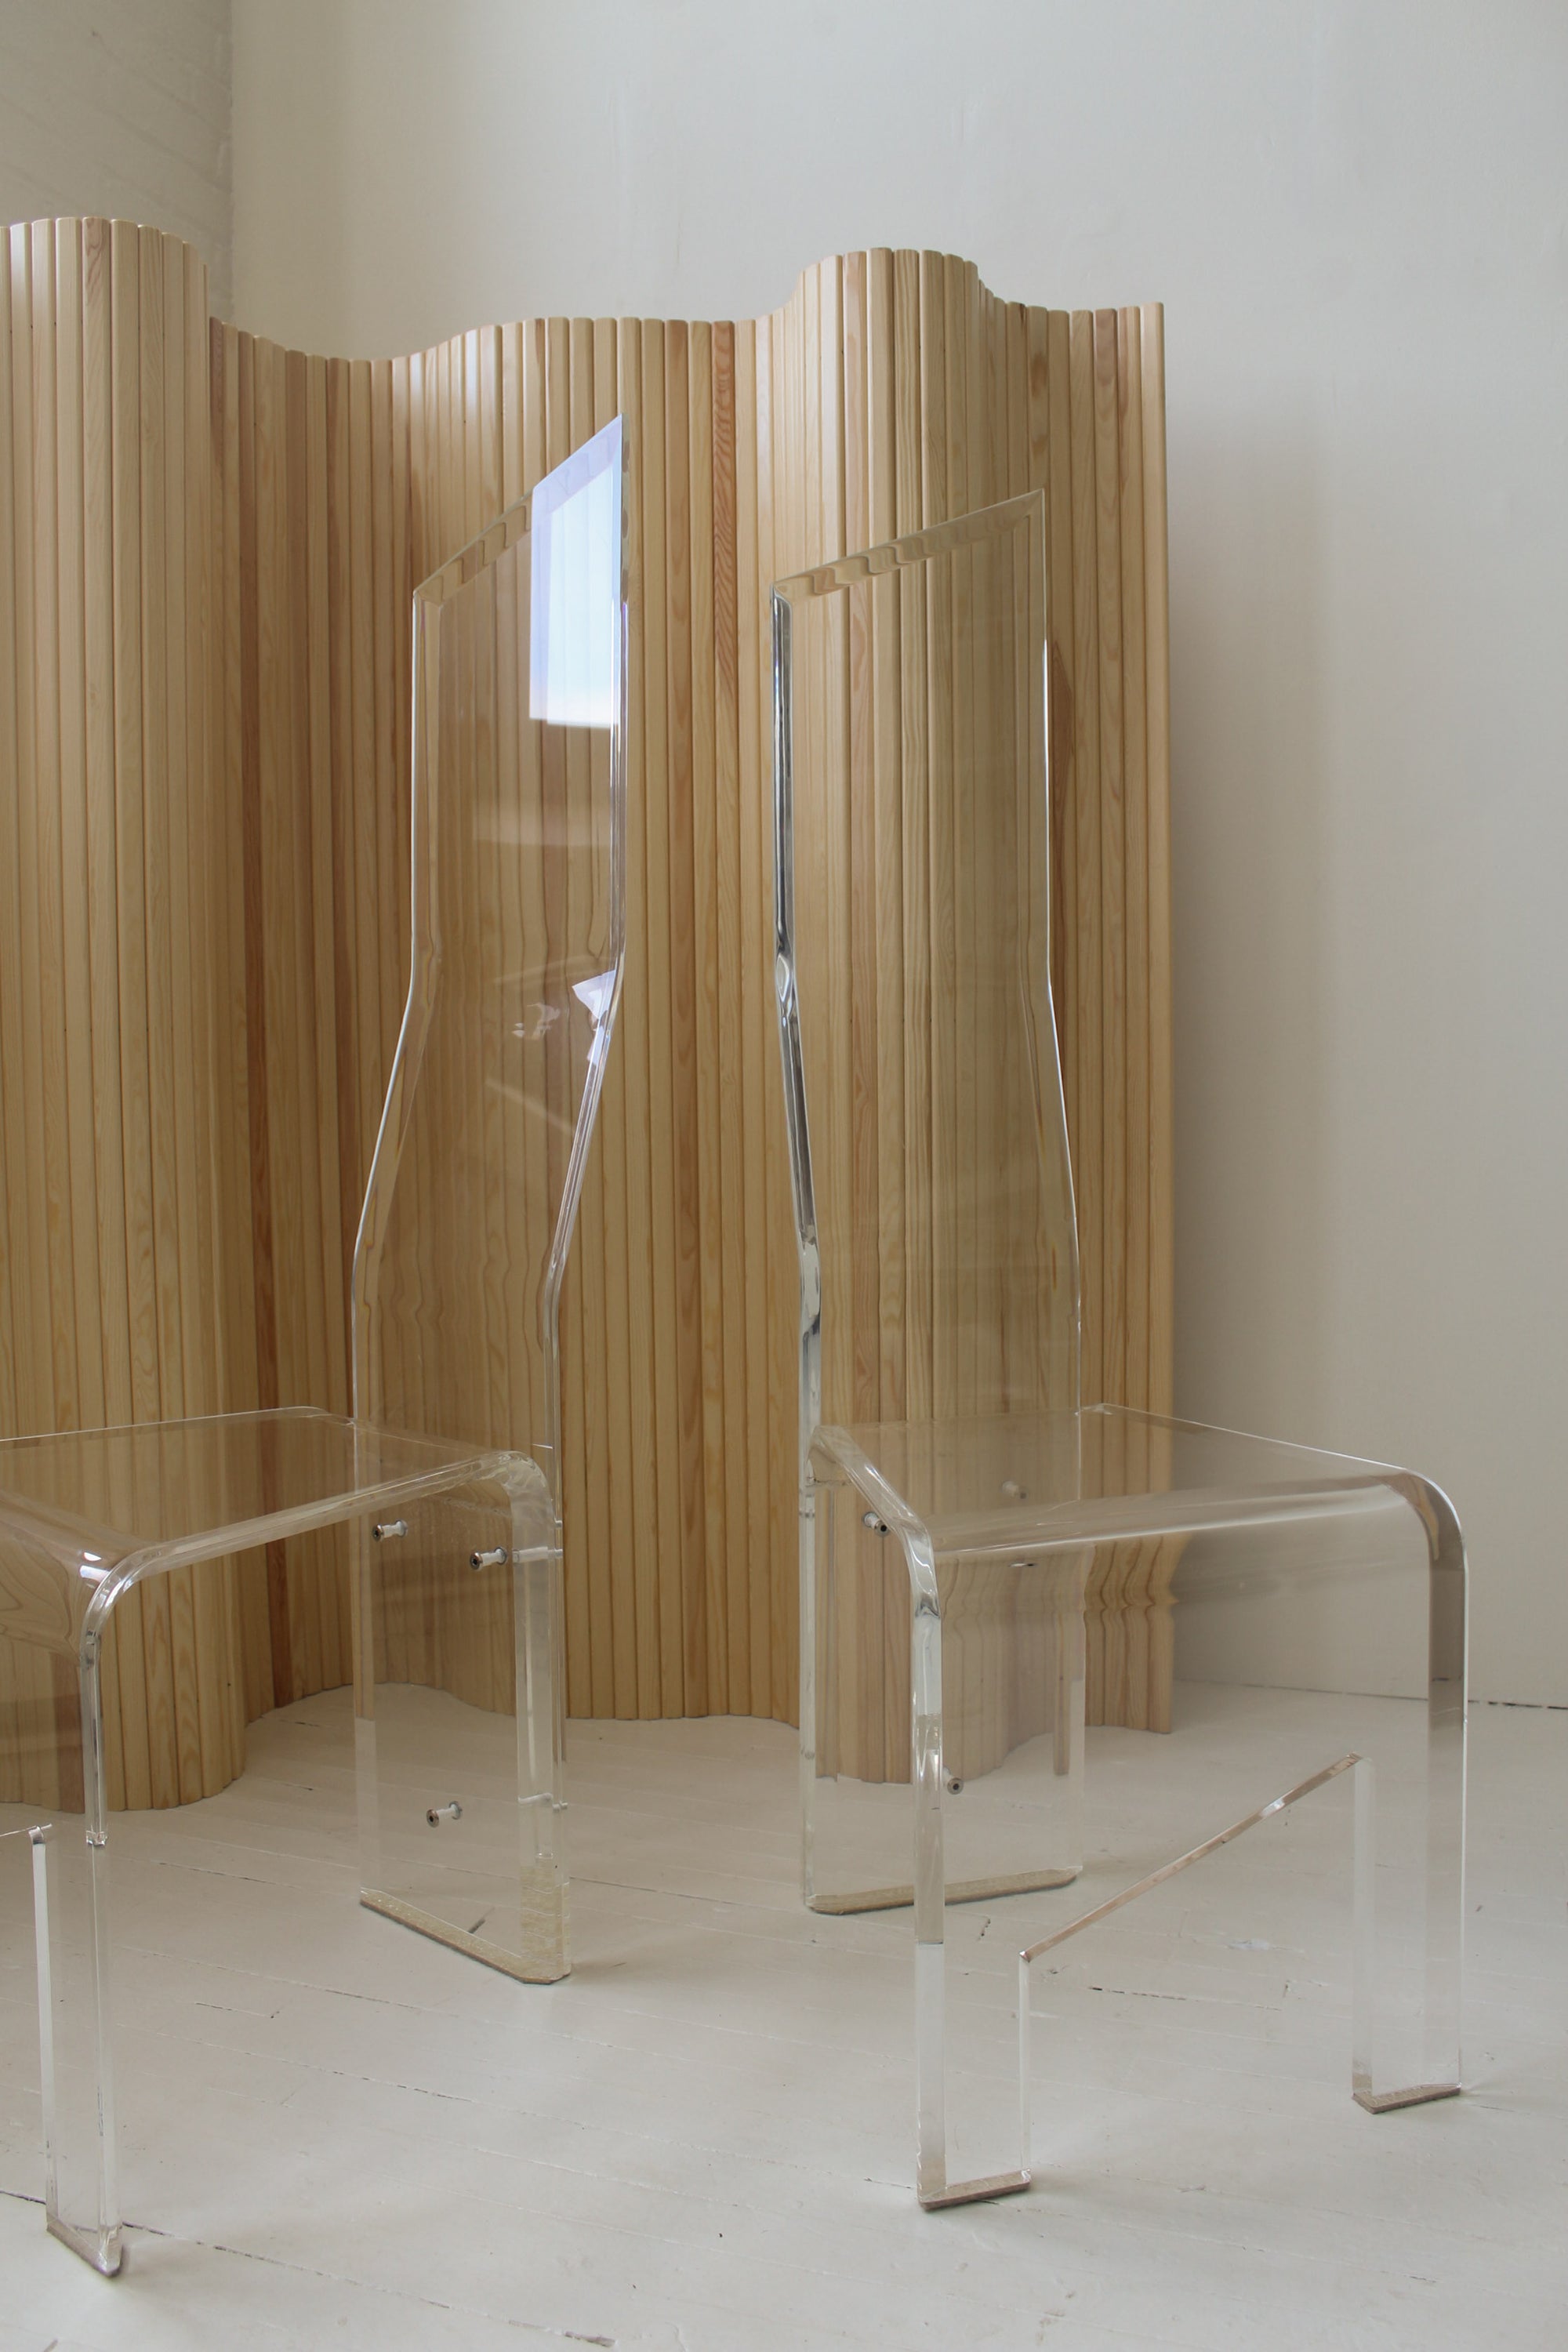 Lucite Dining Chairs